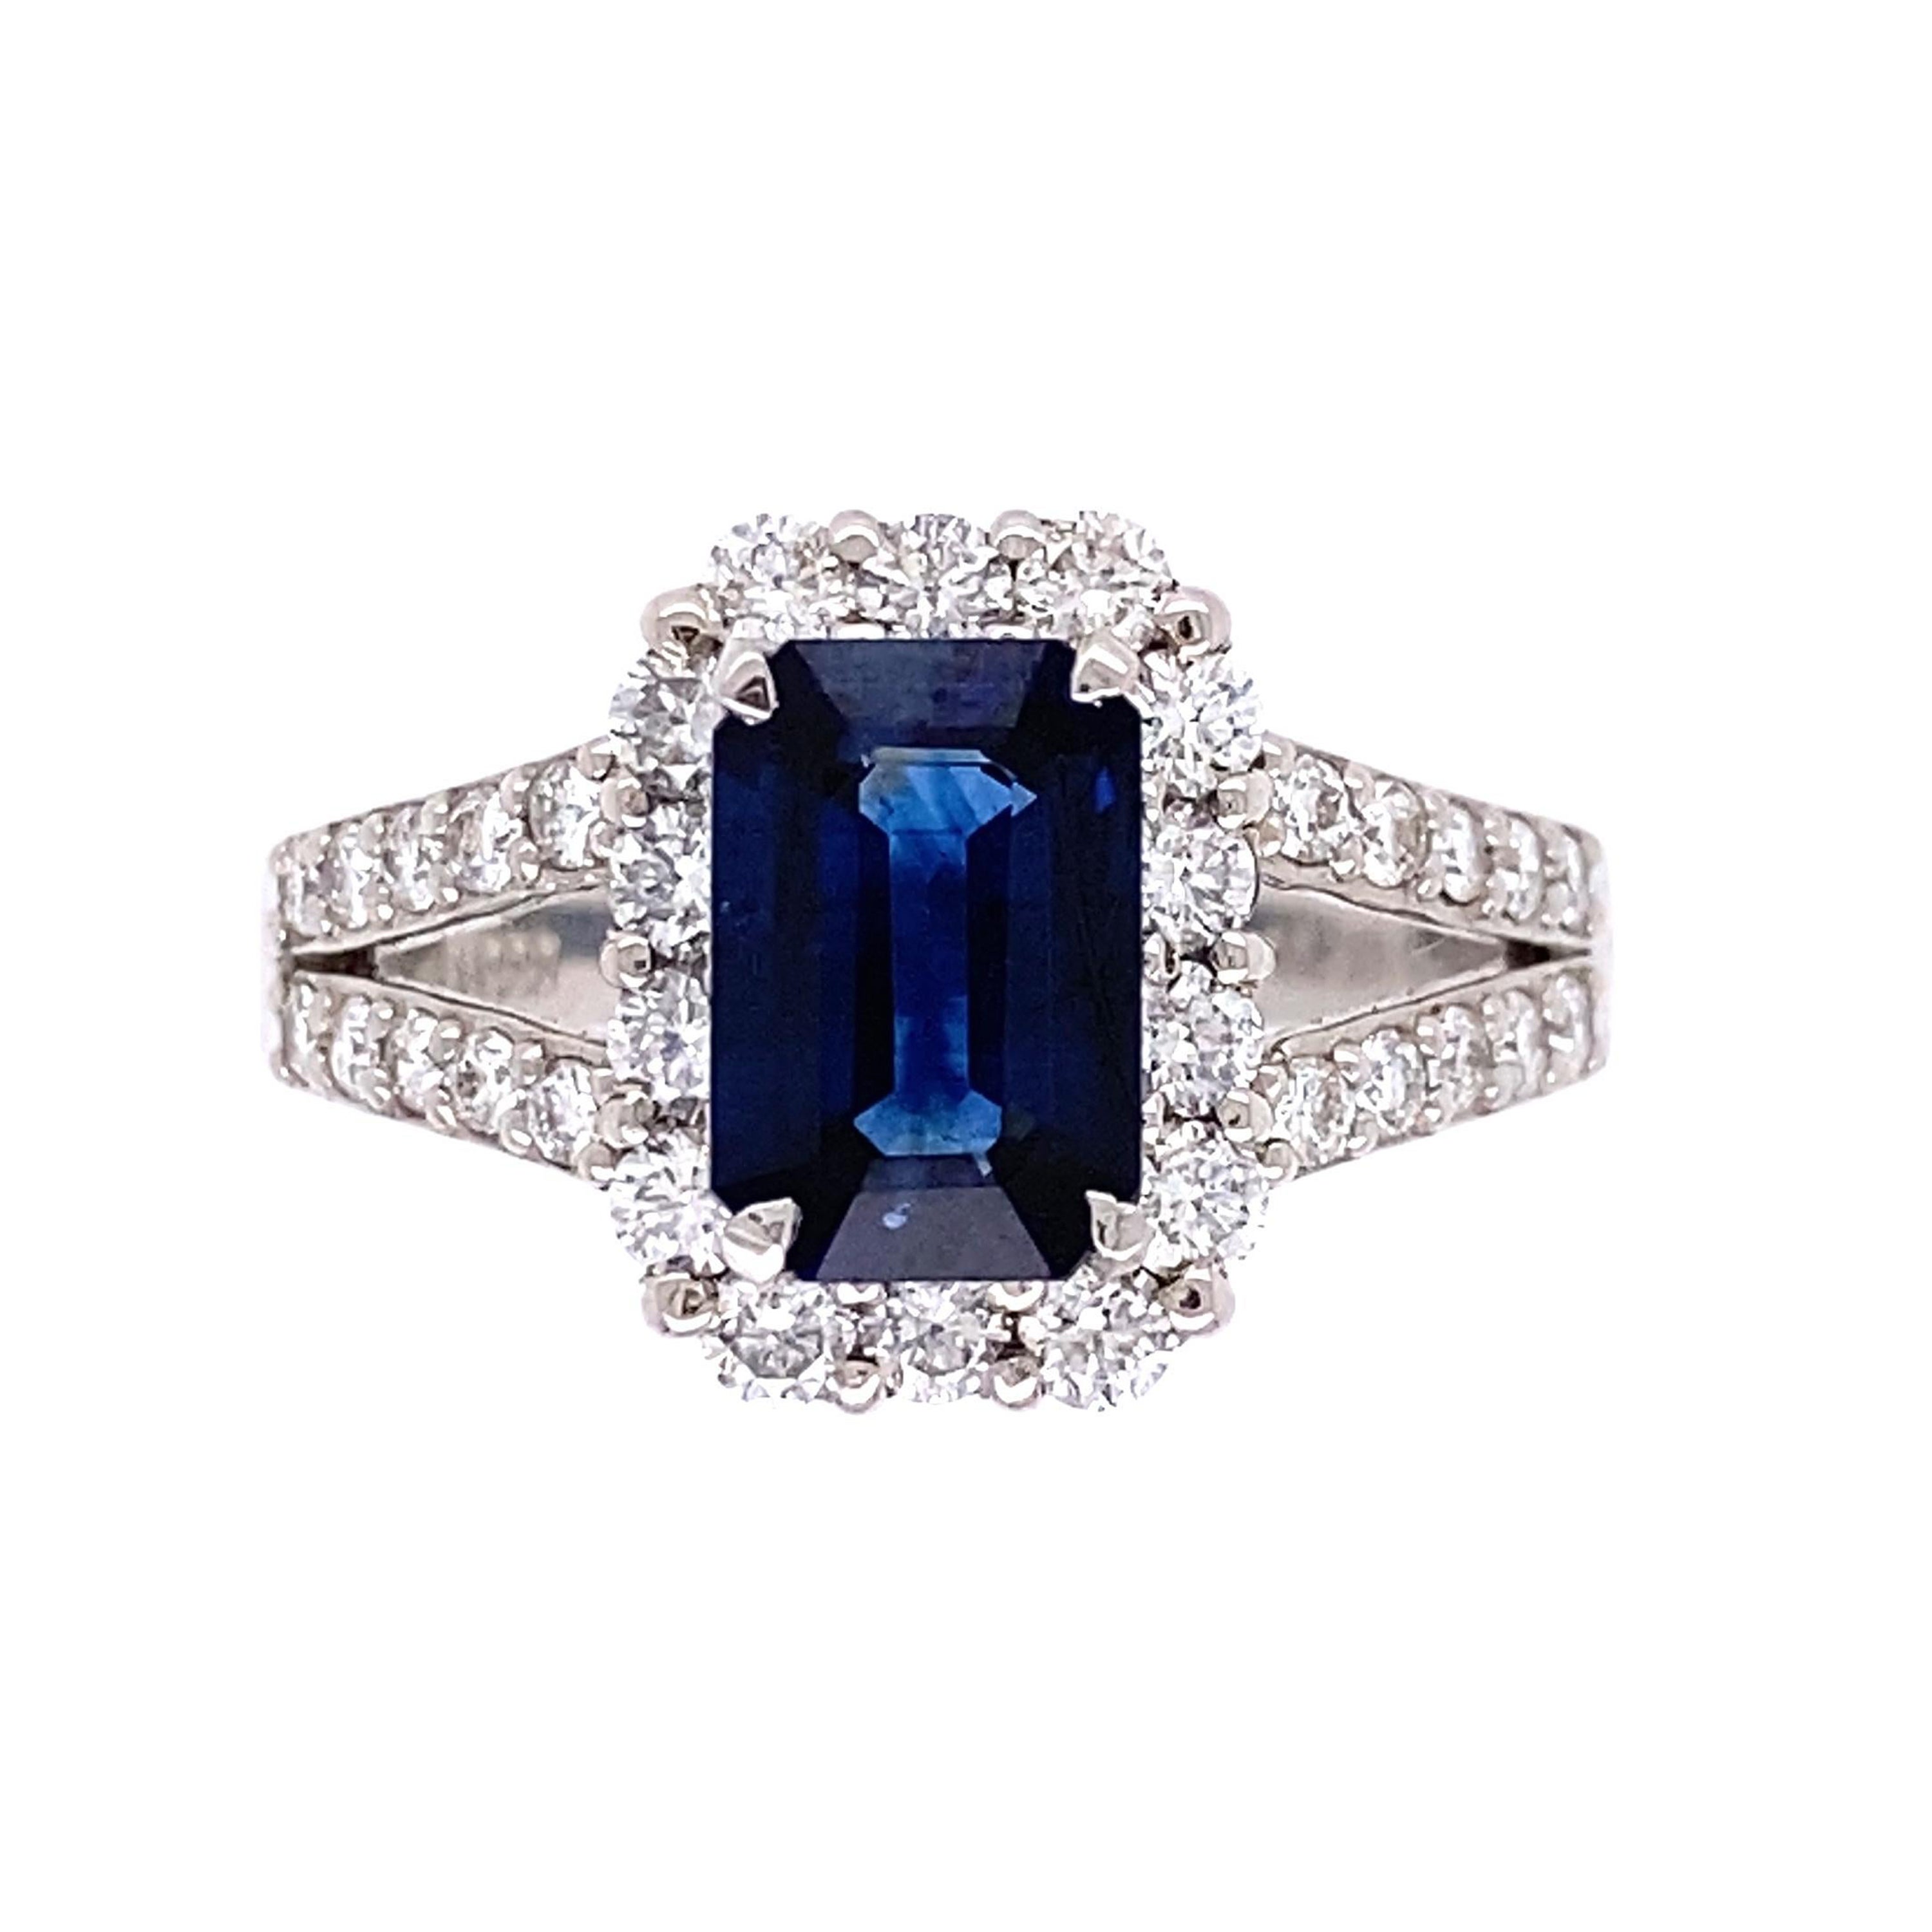 Estate Platinum Emerald Cut Sapphire and Diamond Ring For Sale at 1stDibs